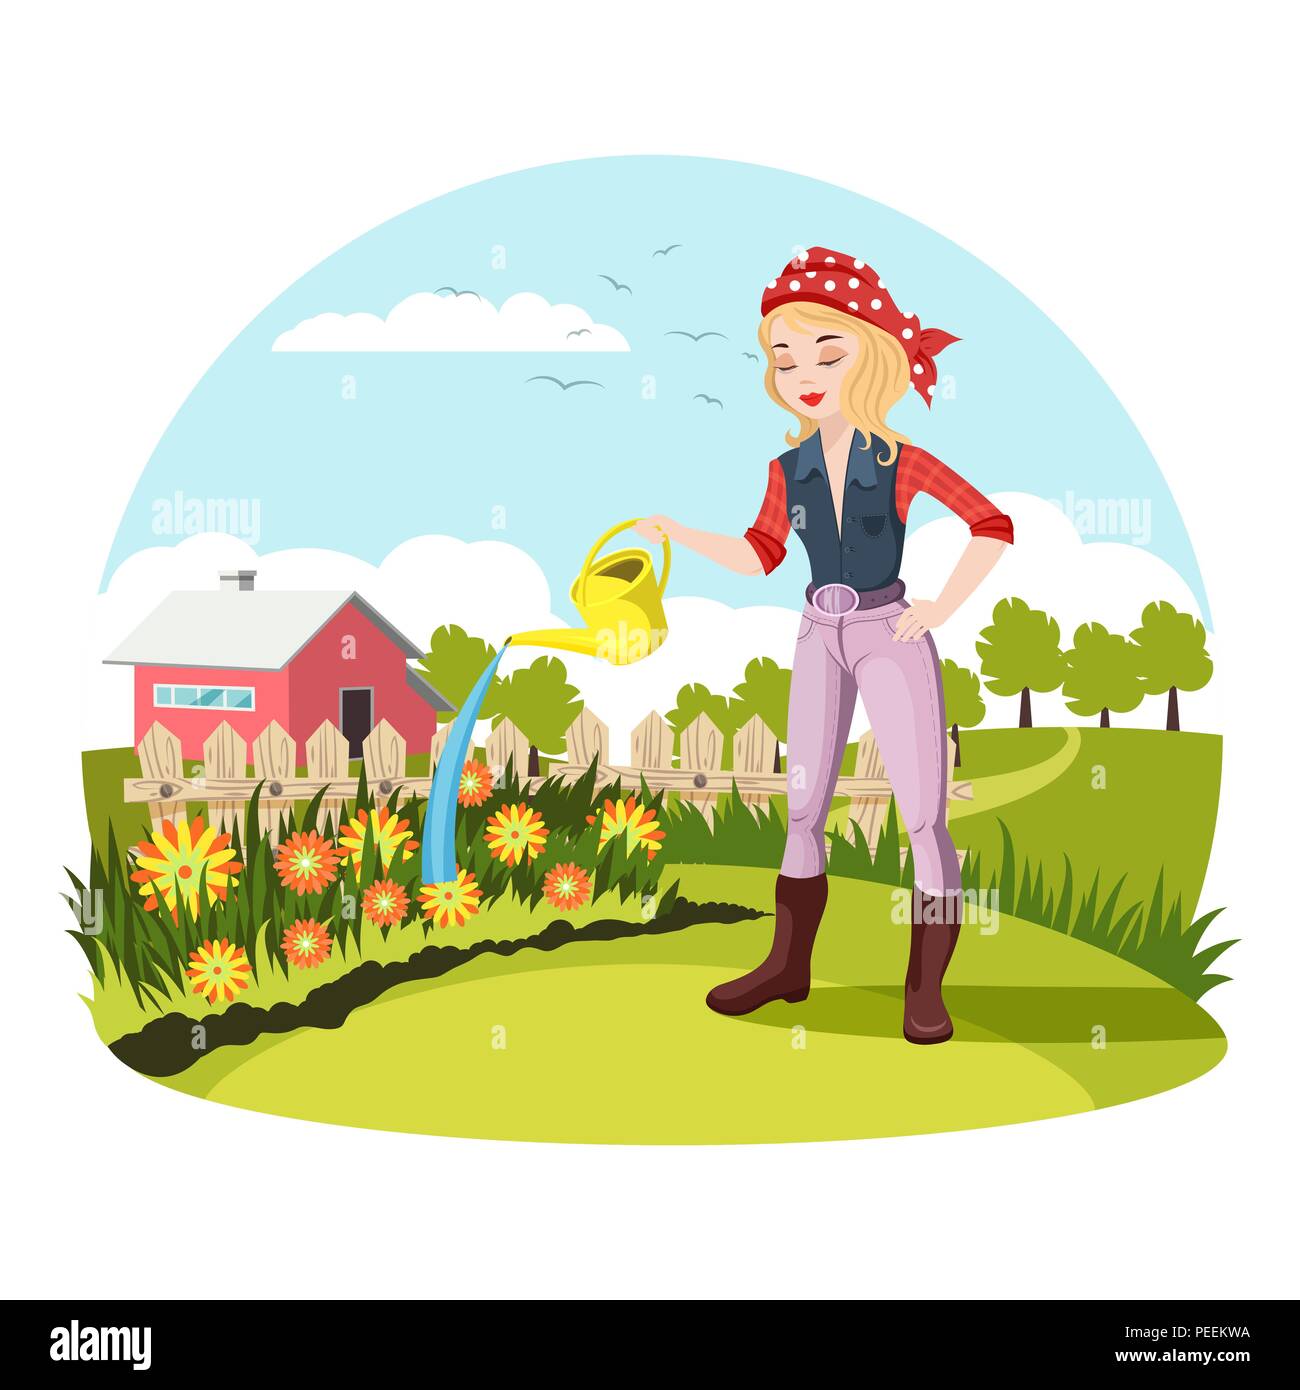 Village woman holding water can, female farmer watering flowers in garden or yard with fence. Village with house or building and trees, farmland girl in kerchief or bandana. Rural worker, people theme Stock Vector